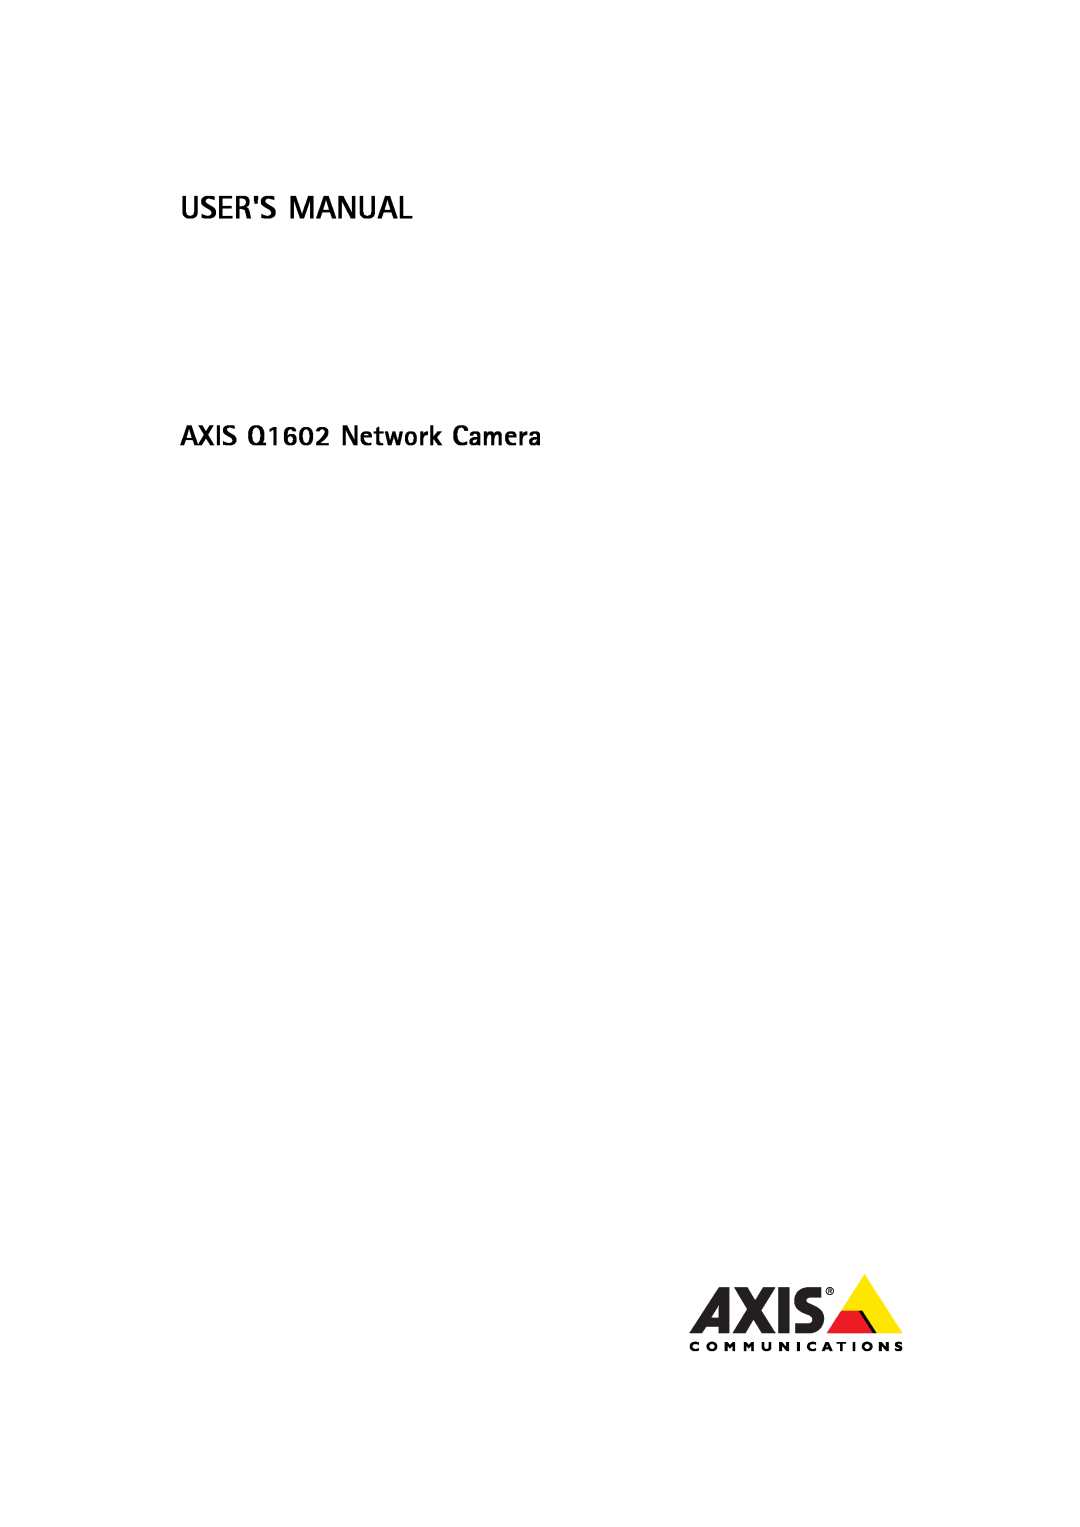 Axis Communications user manual Users Manual, AXIS Q1602 Network Camera 